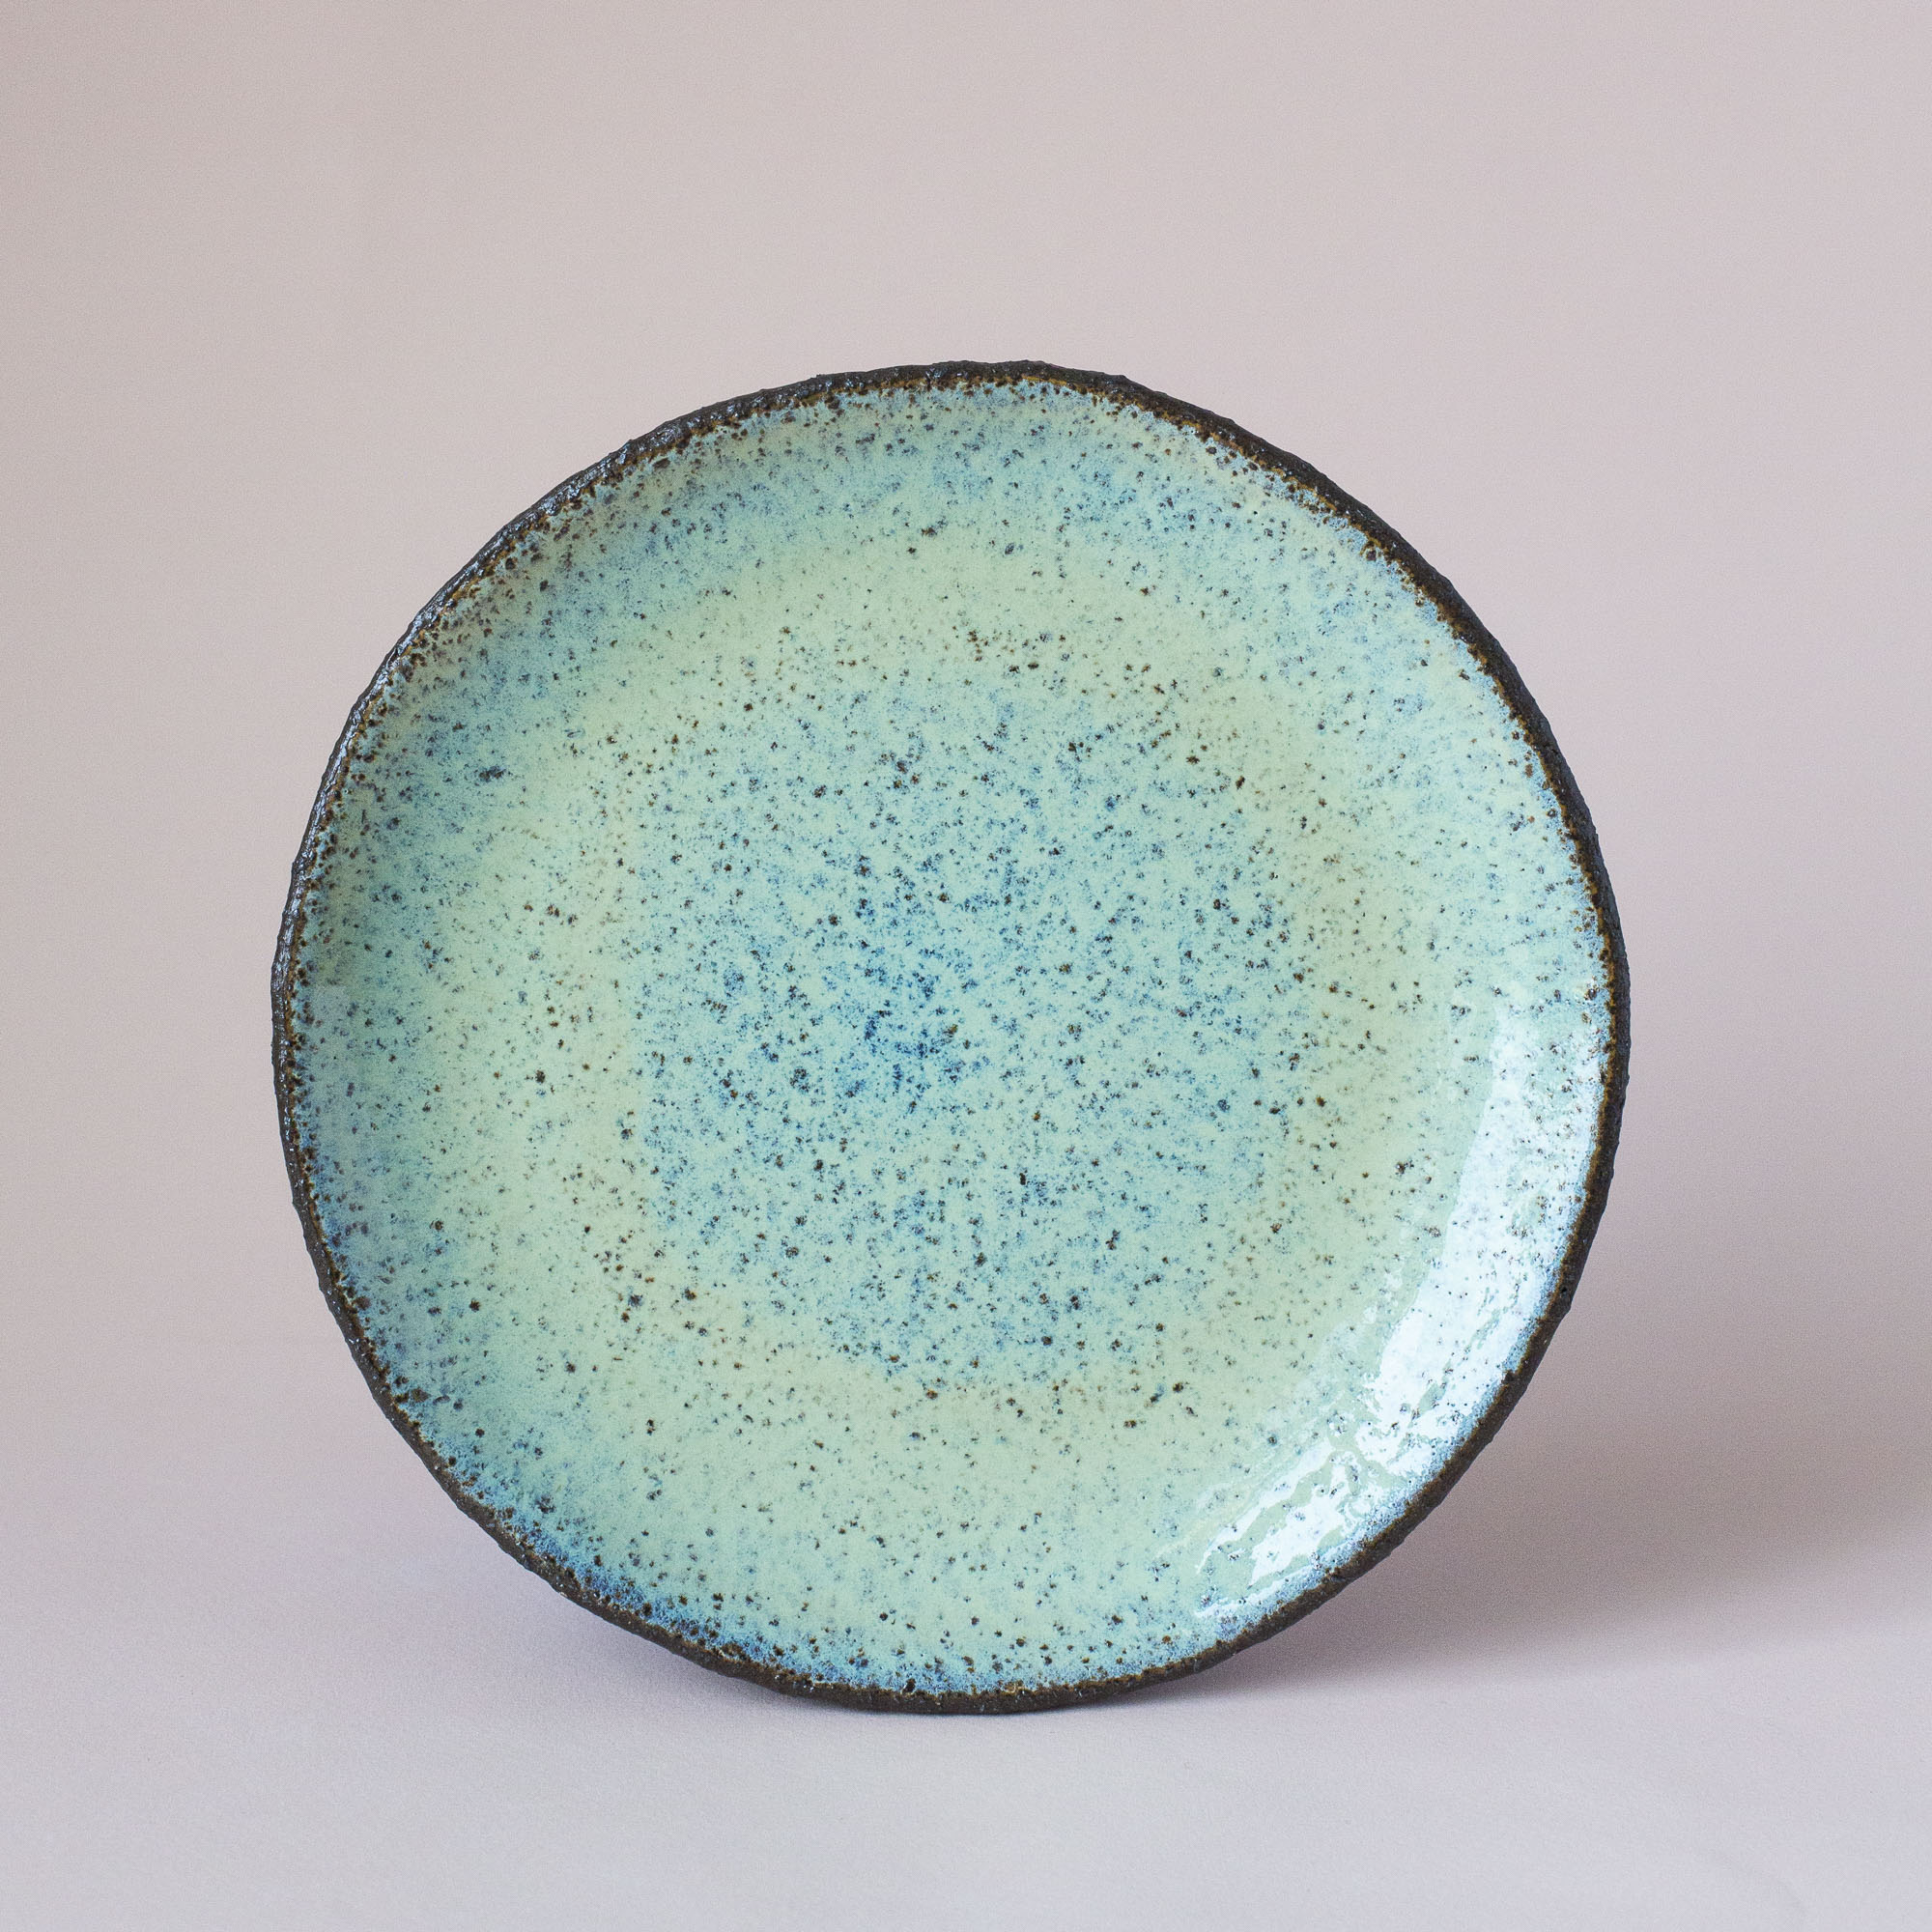 Turquoise plate made from chamotte clay, 21 cm